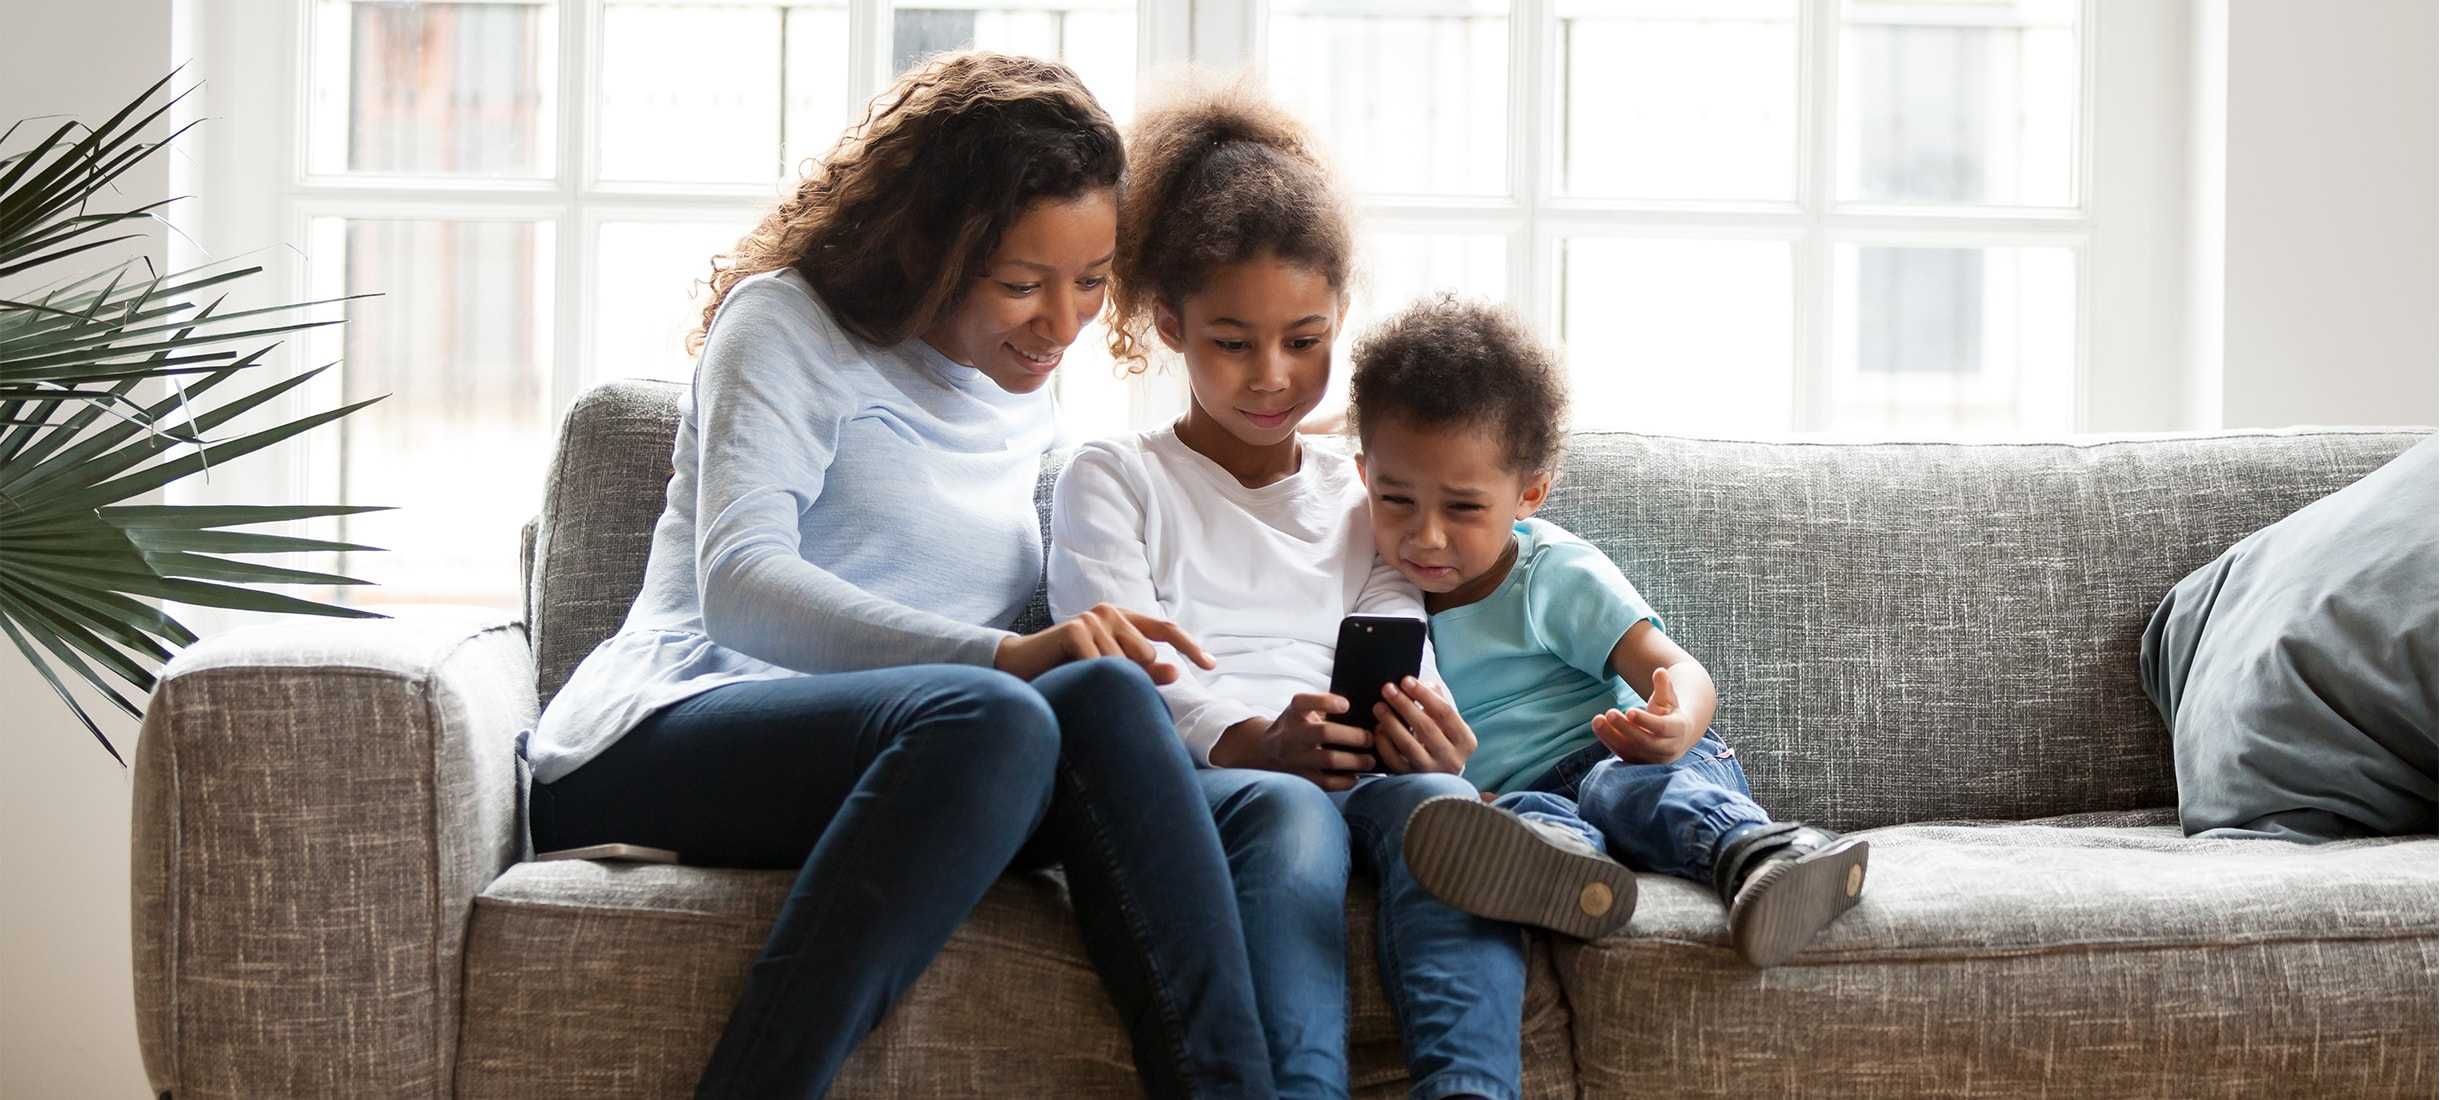 Blog - How to talk to kids about online safety